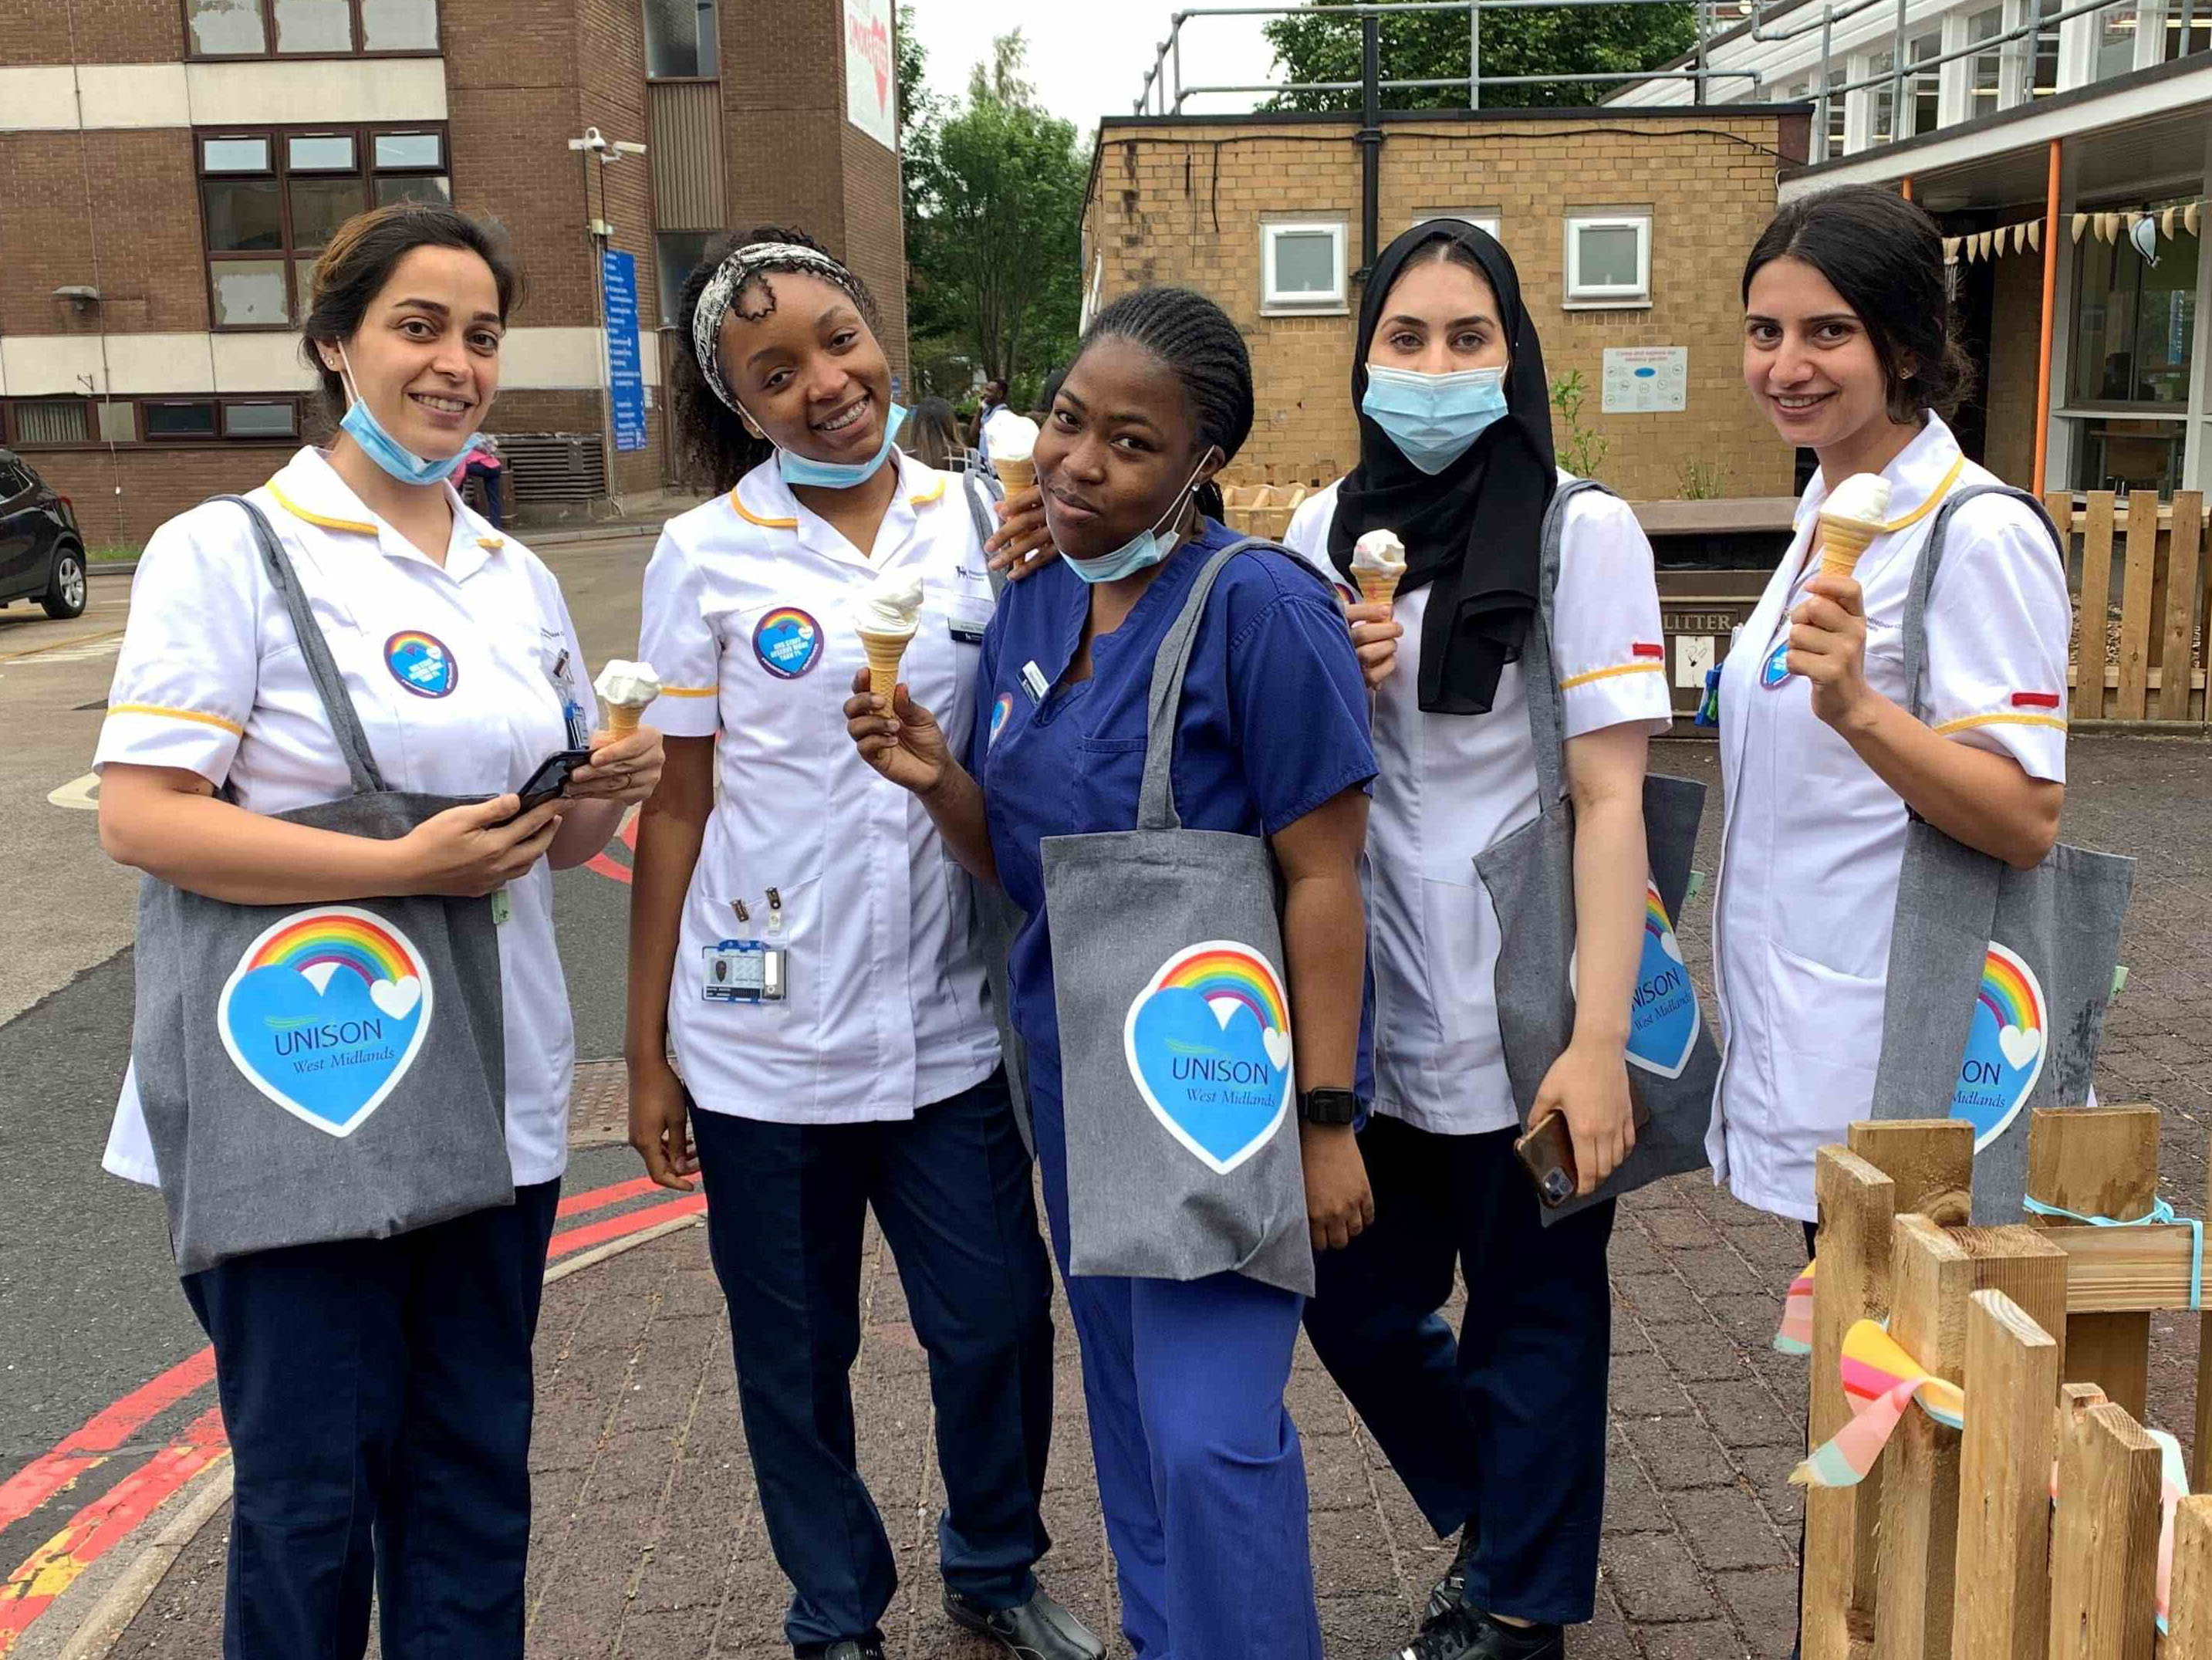 Staff at Sandwell Hospital in the West Midlands enjoy ice creams as part of the 2days for 2k campaign